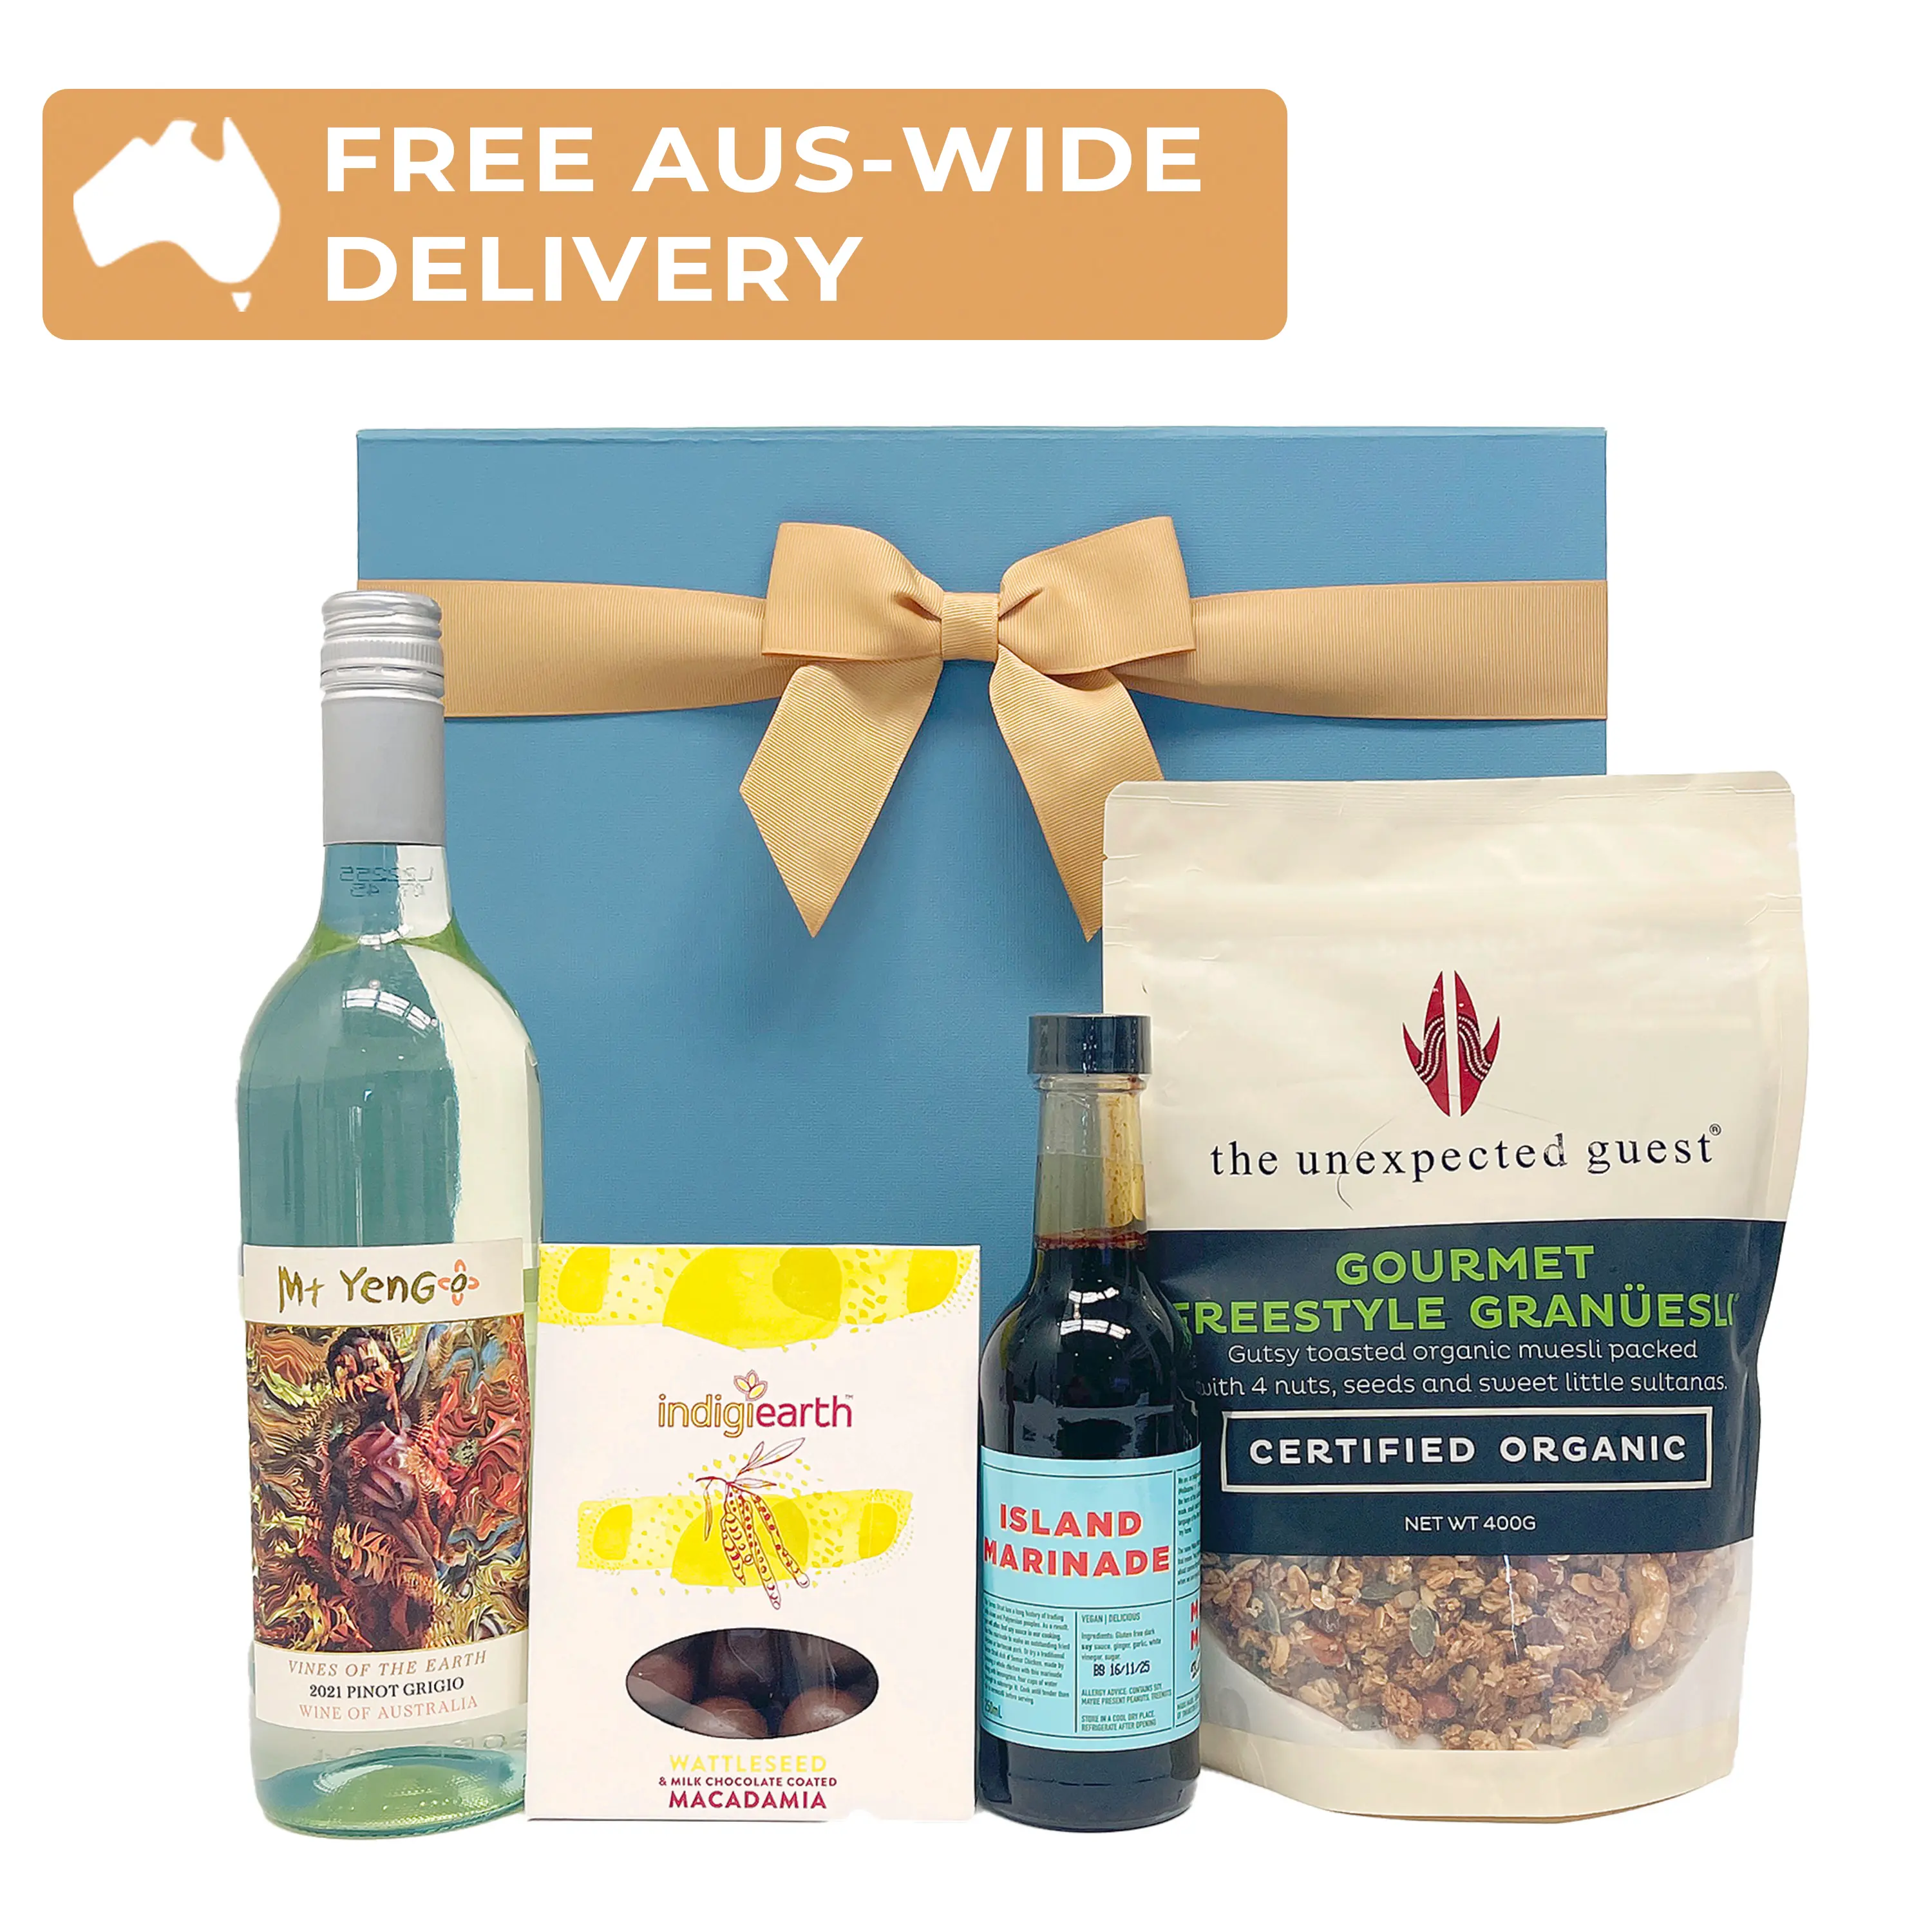 Tastes of Country Indigenous Hamper with Mt Yengo Pinot Grigio